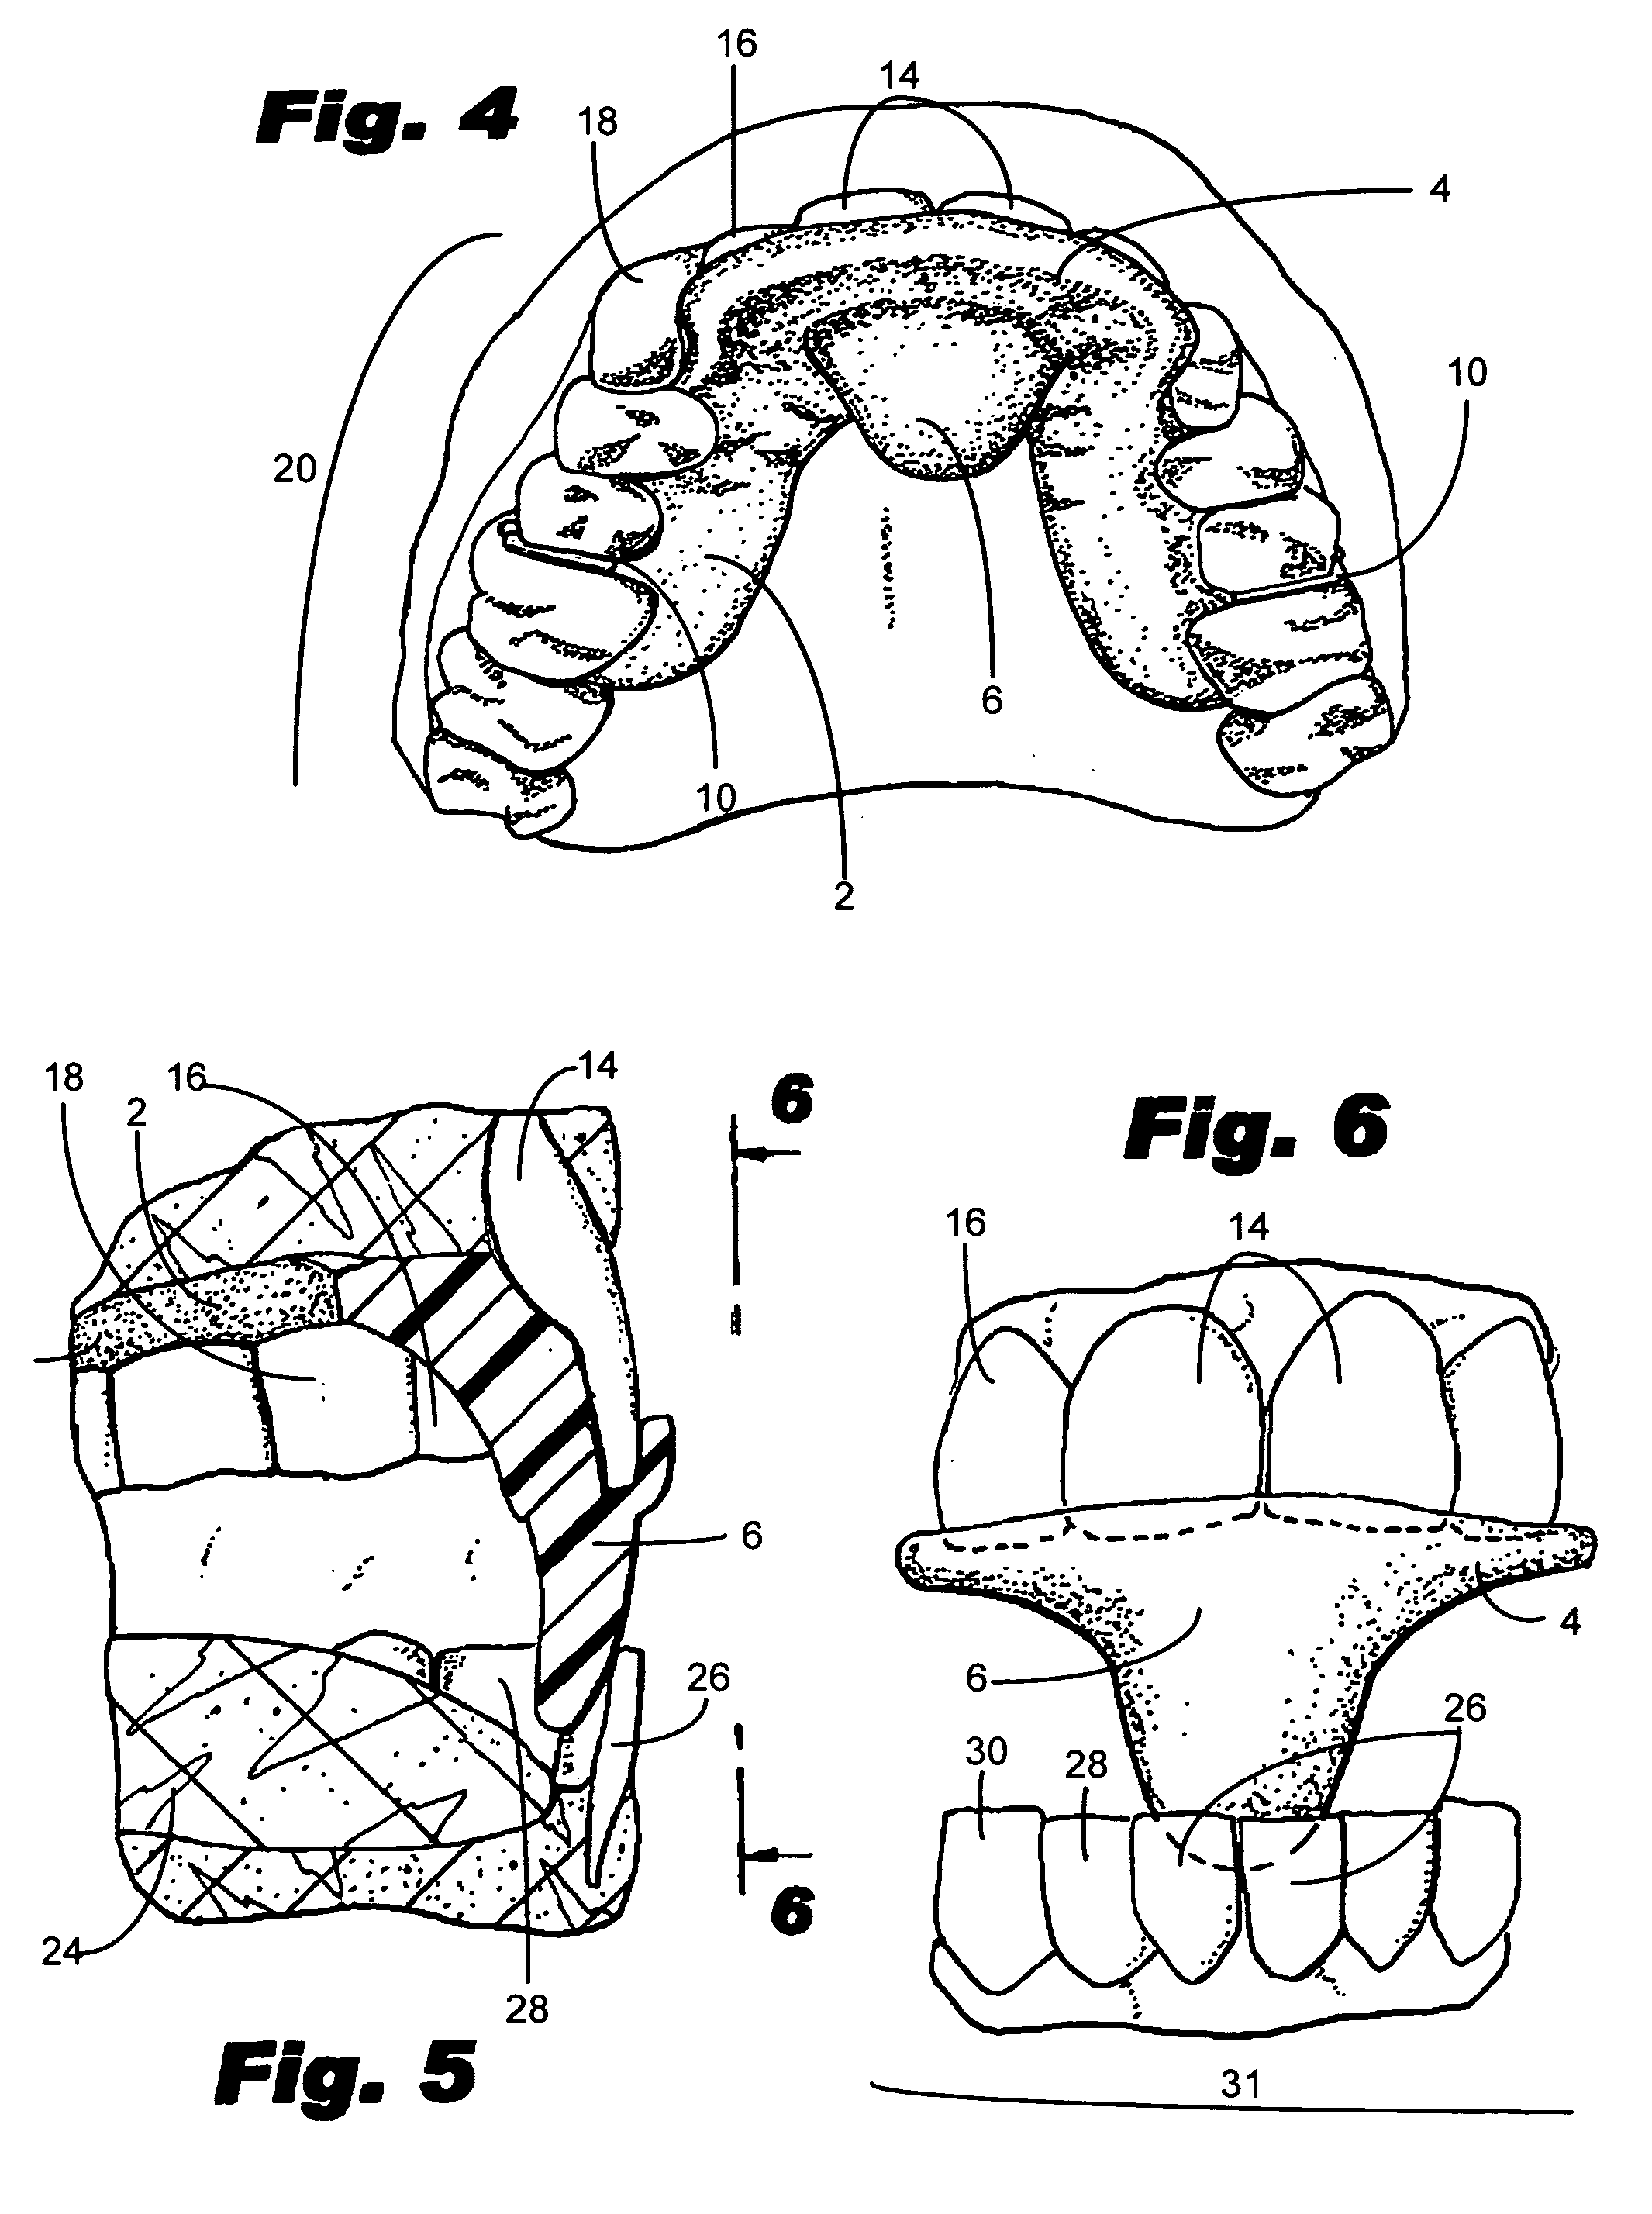 Intraoral mandibular advancement device for treatment of sleep disorders, including snoring, obstructive sleep apnea, and gastroesophageal reflux disease and method for delivering the same